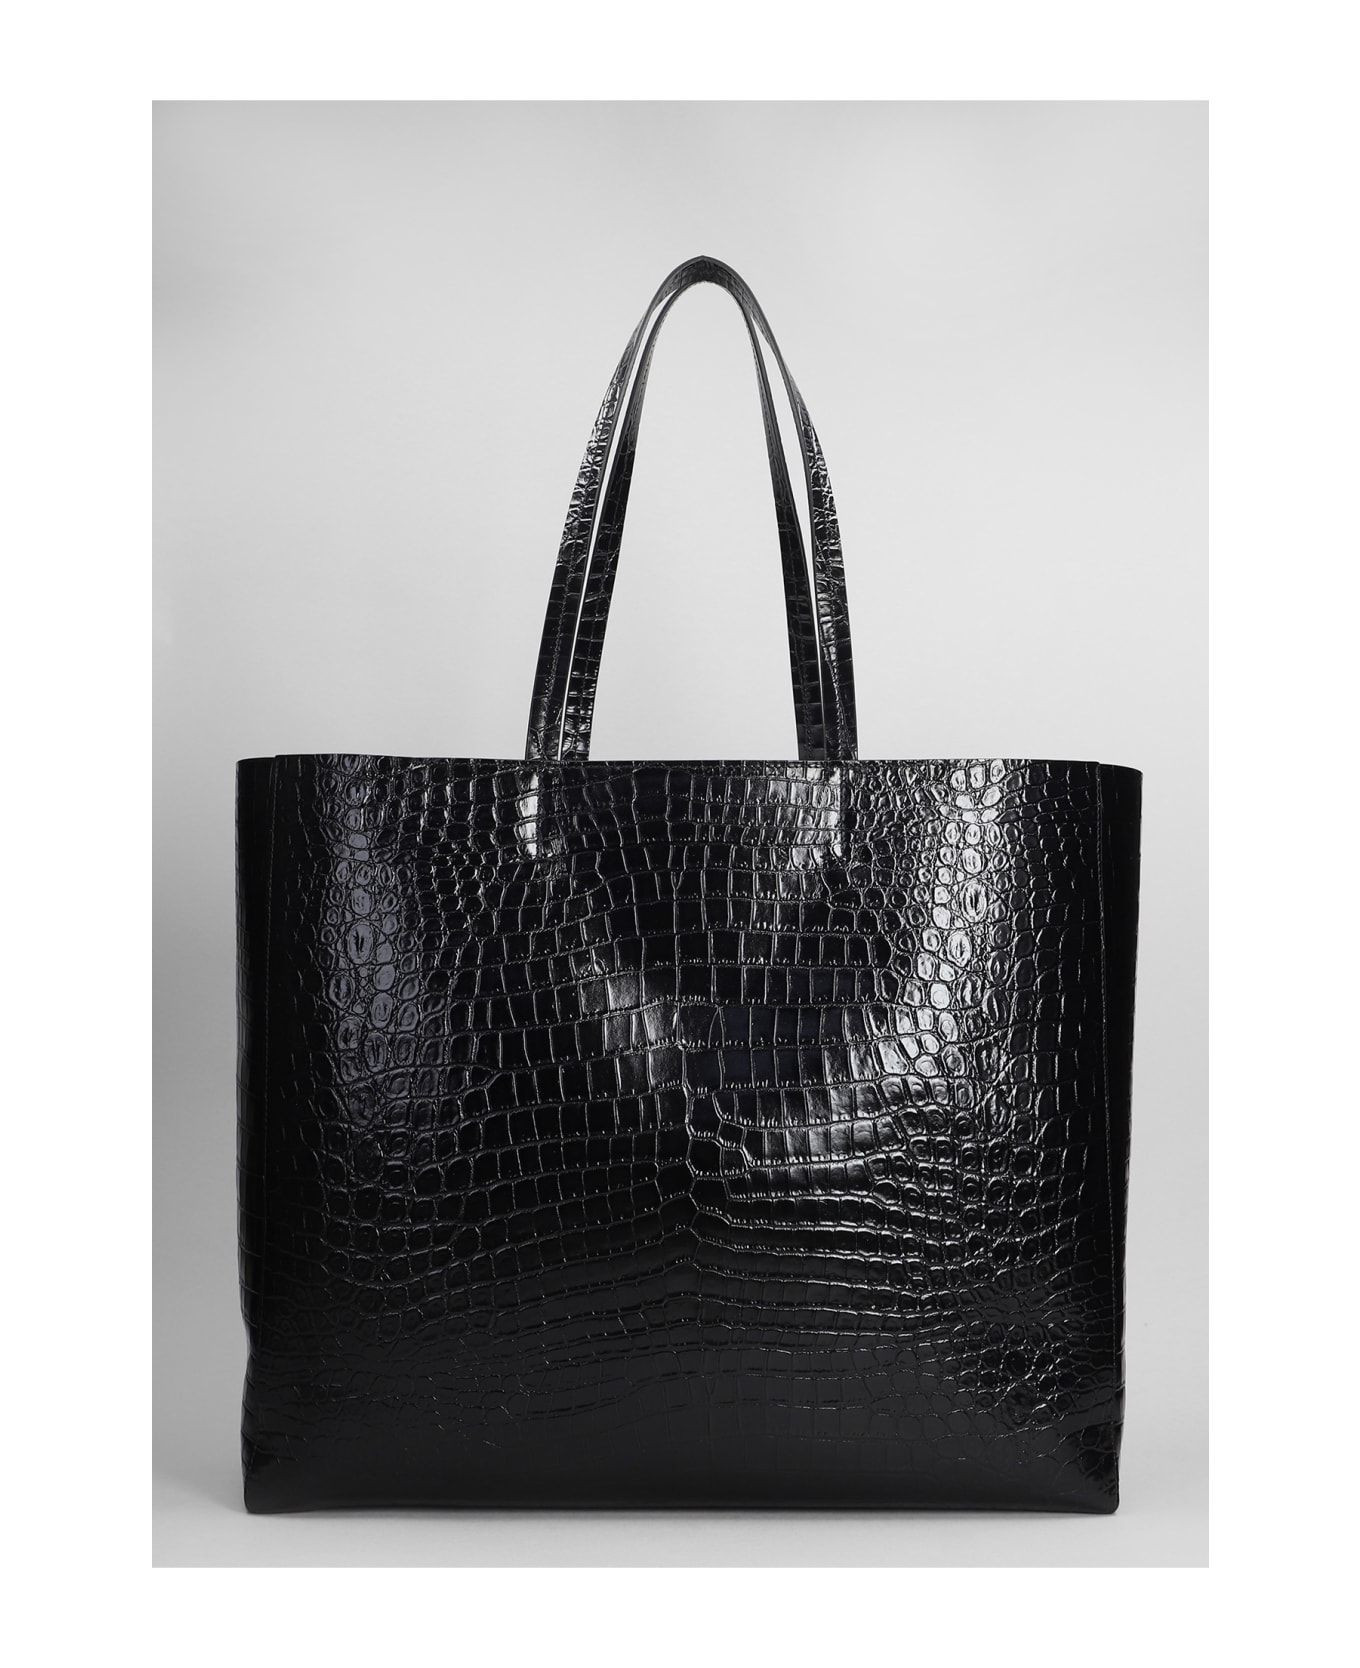 Palm Angels Tote In Black Leather - black